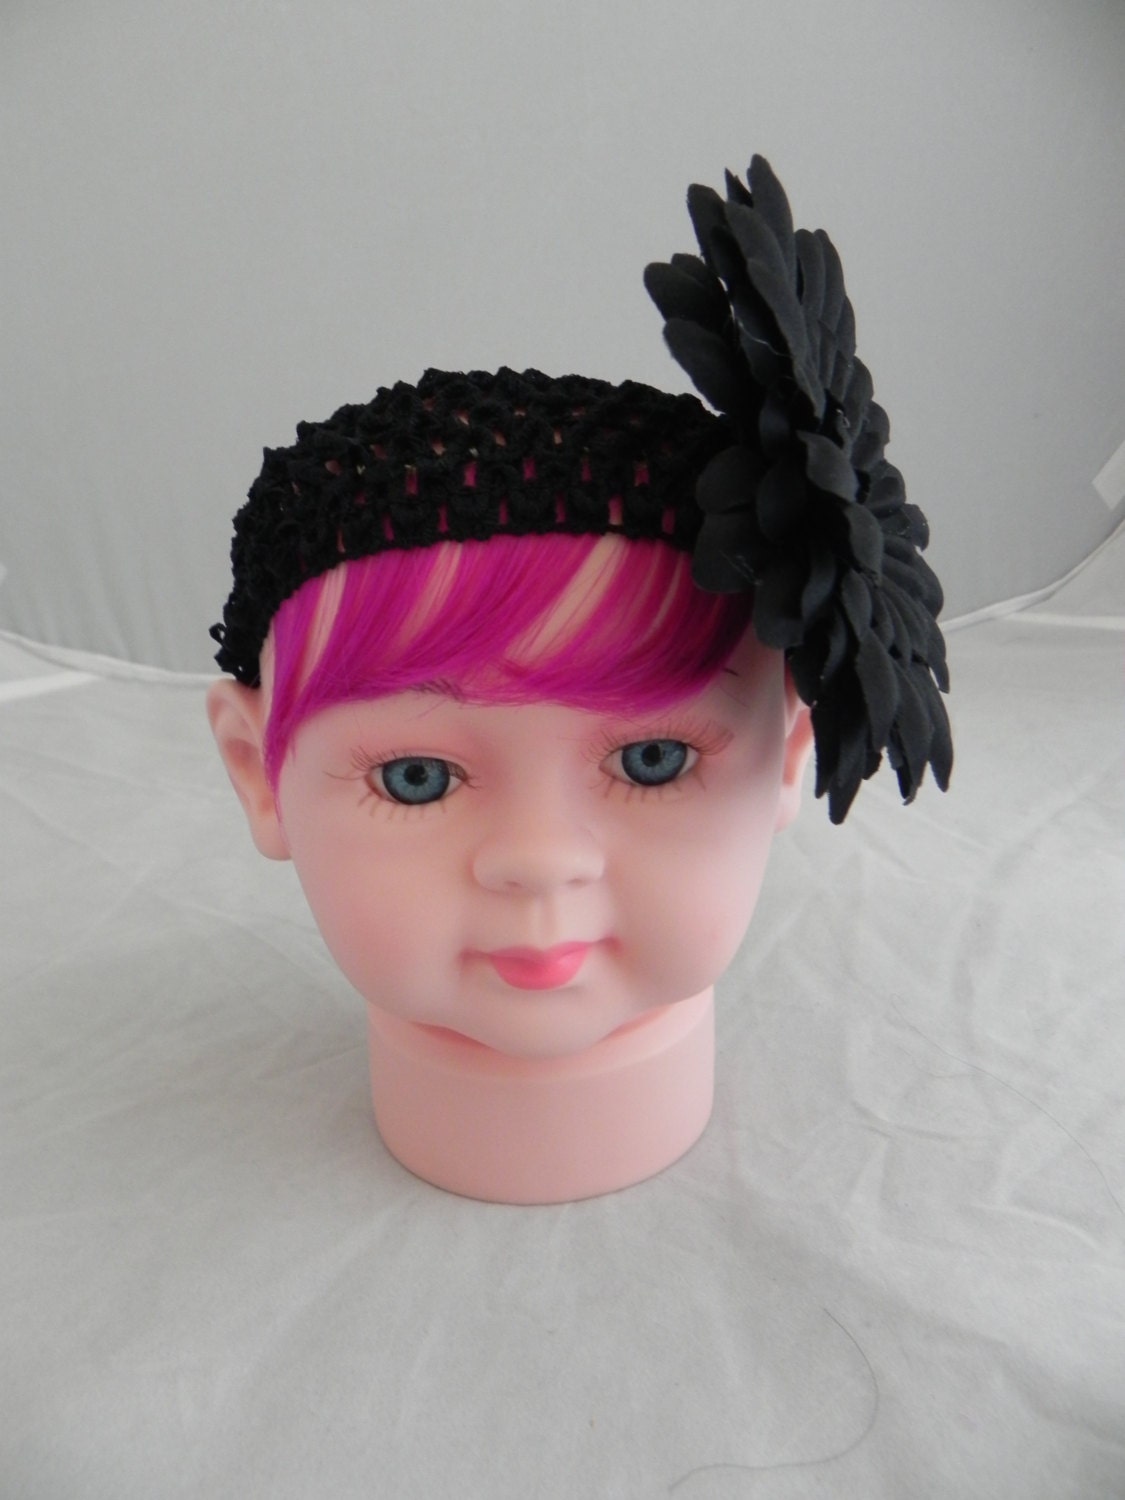 676 New baby headband extensions 502 Items similar to Baby Bangs   Headband with Hair Extensions for Little   